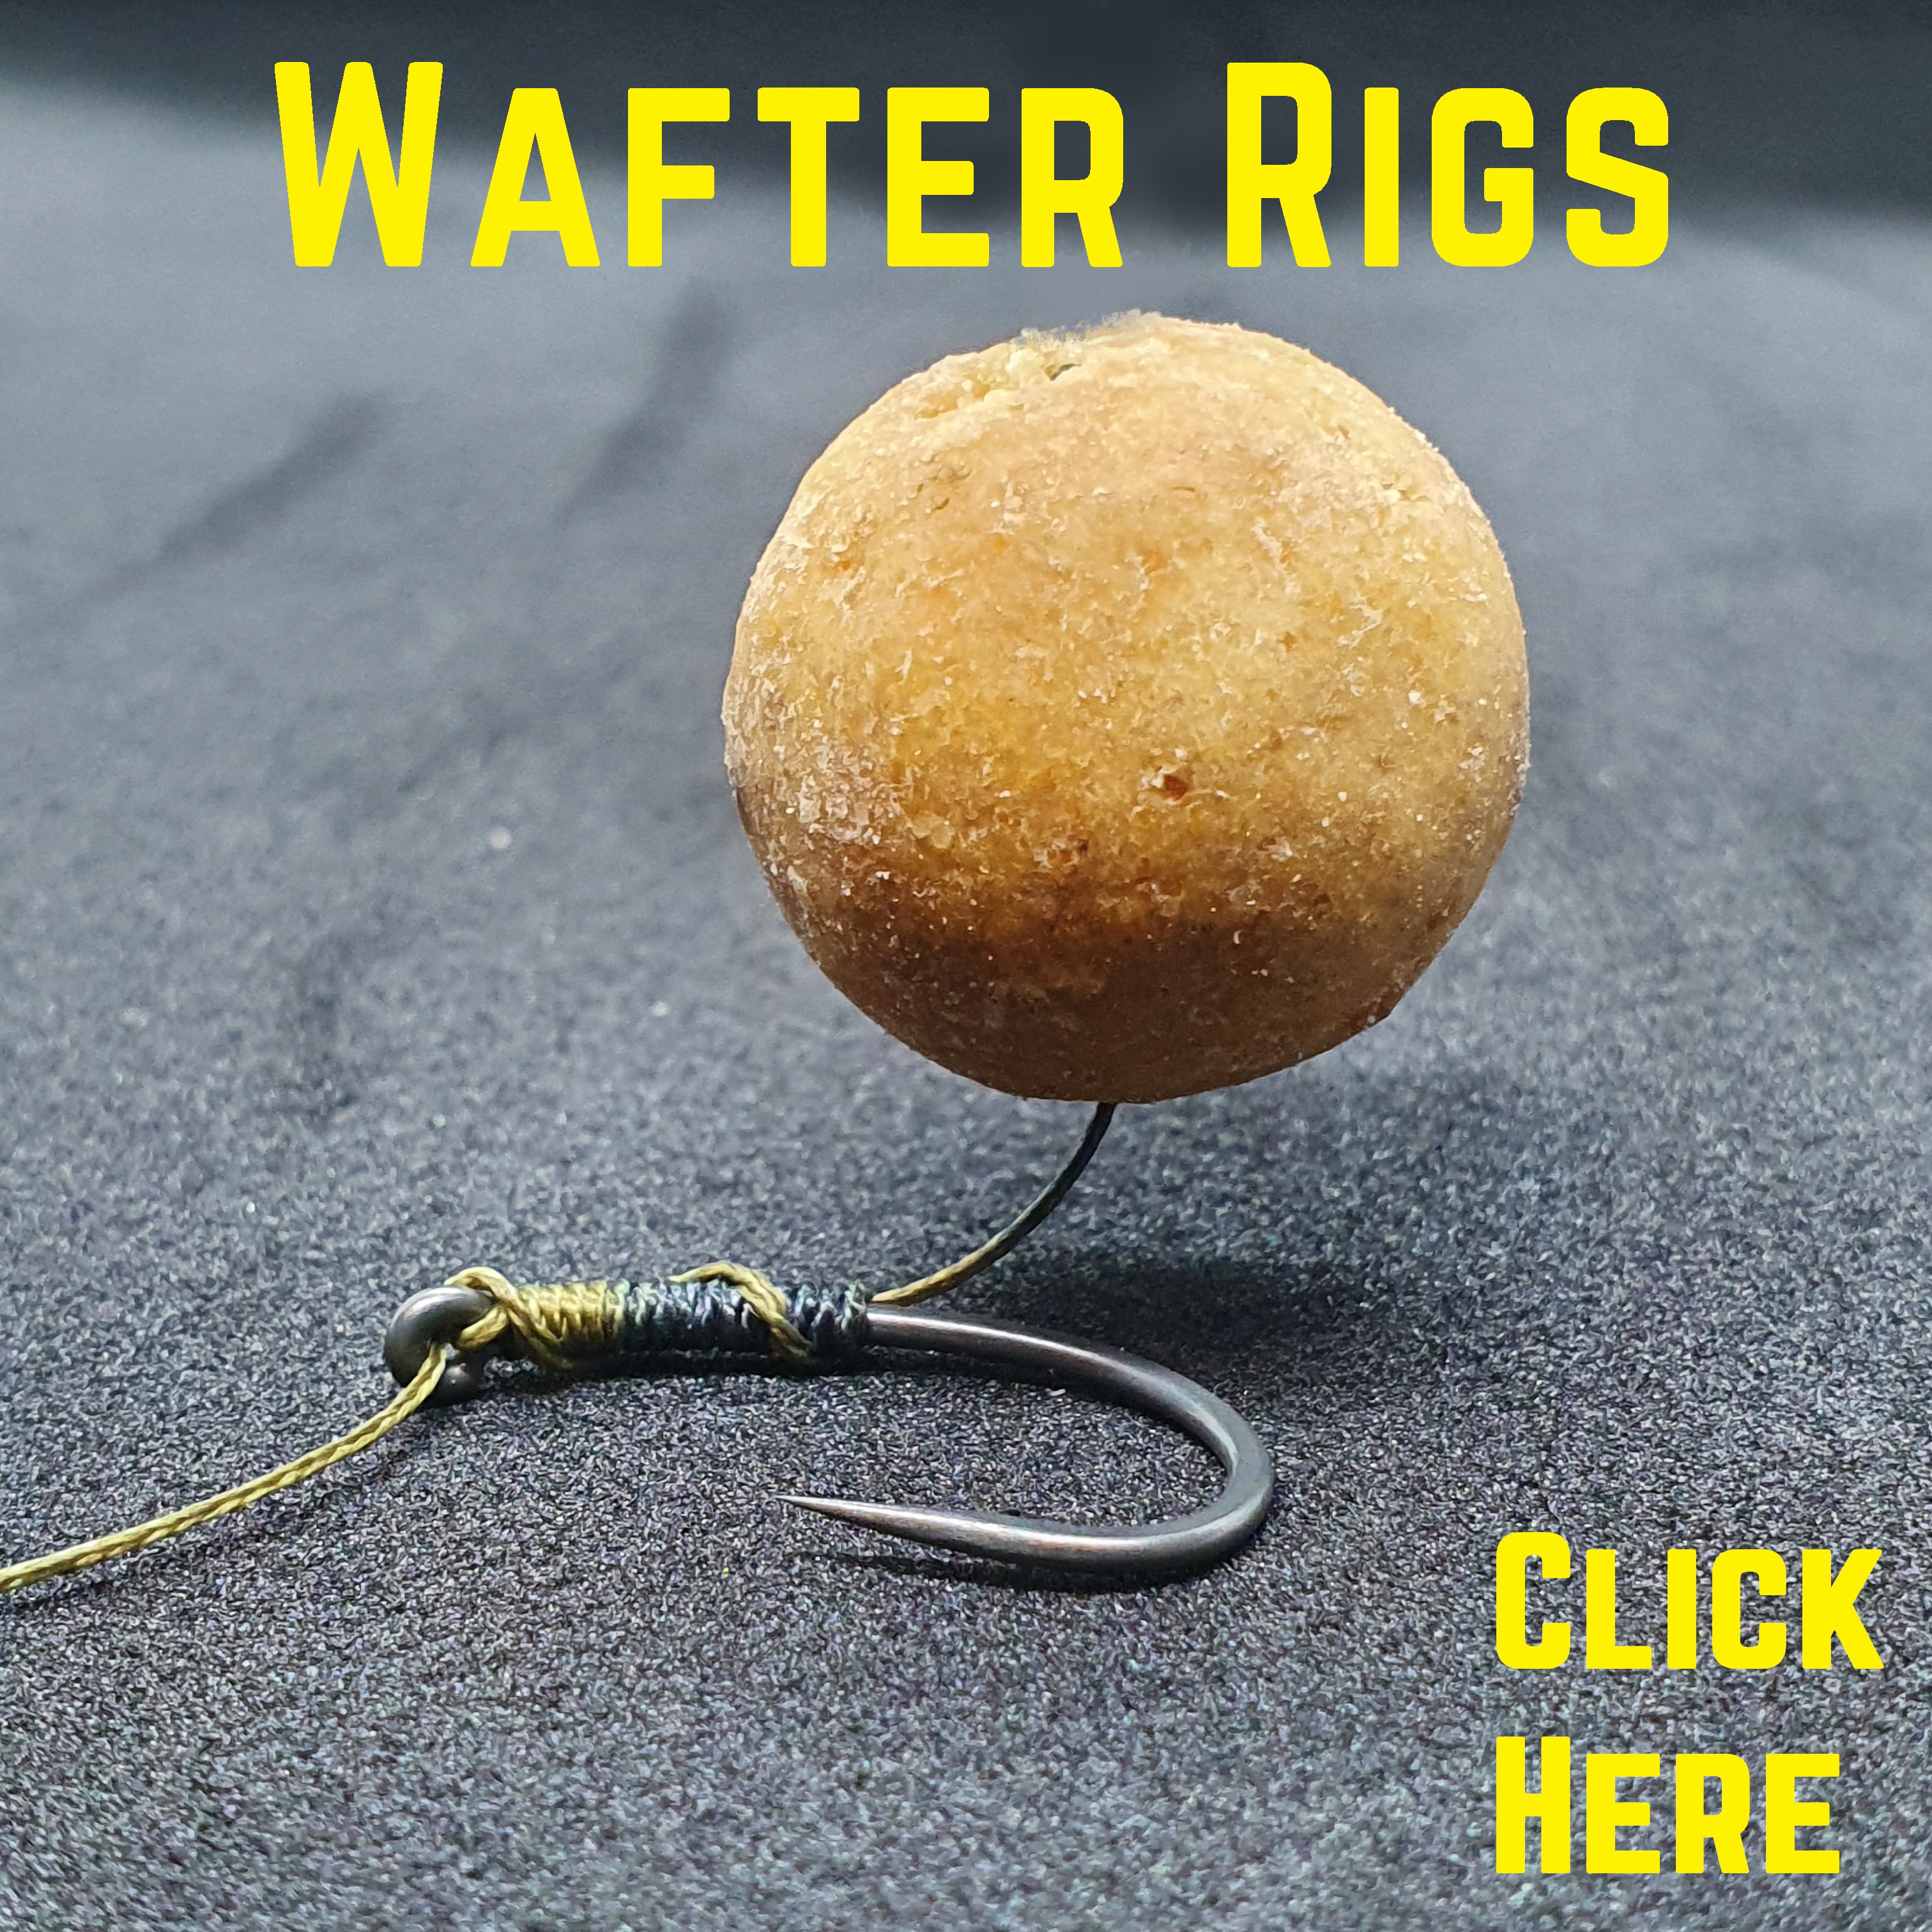 Please take a look at our other Wafter Rig listings